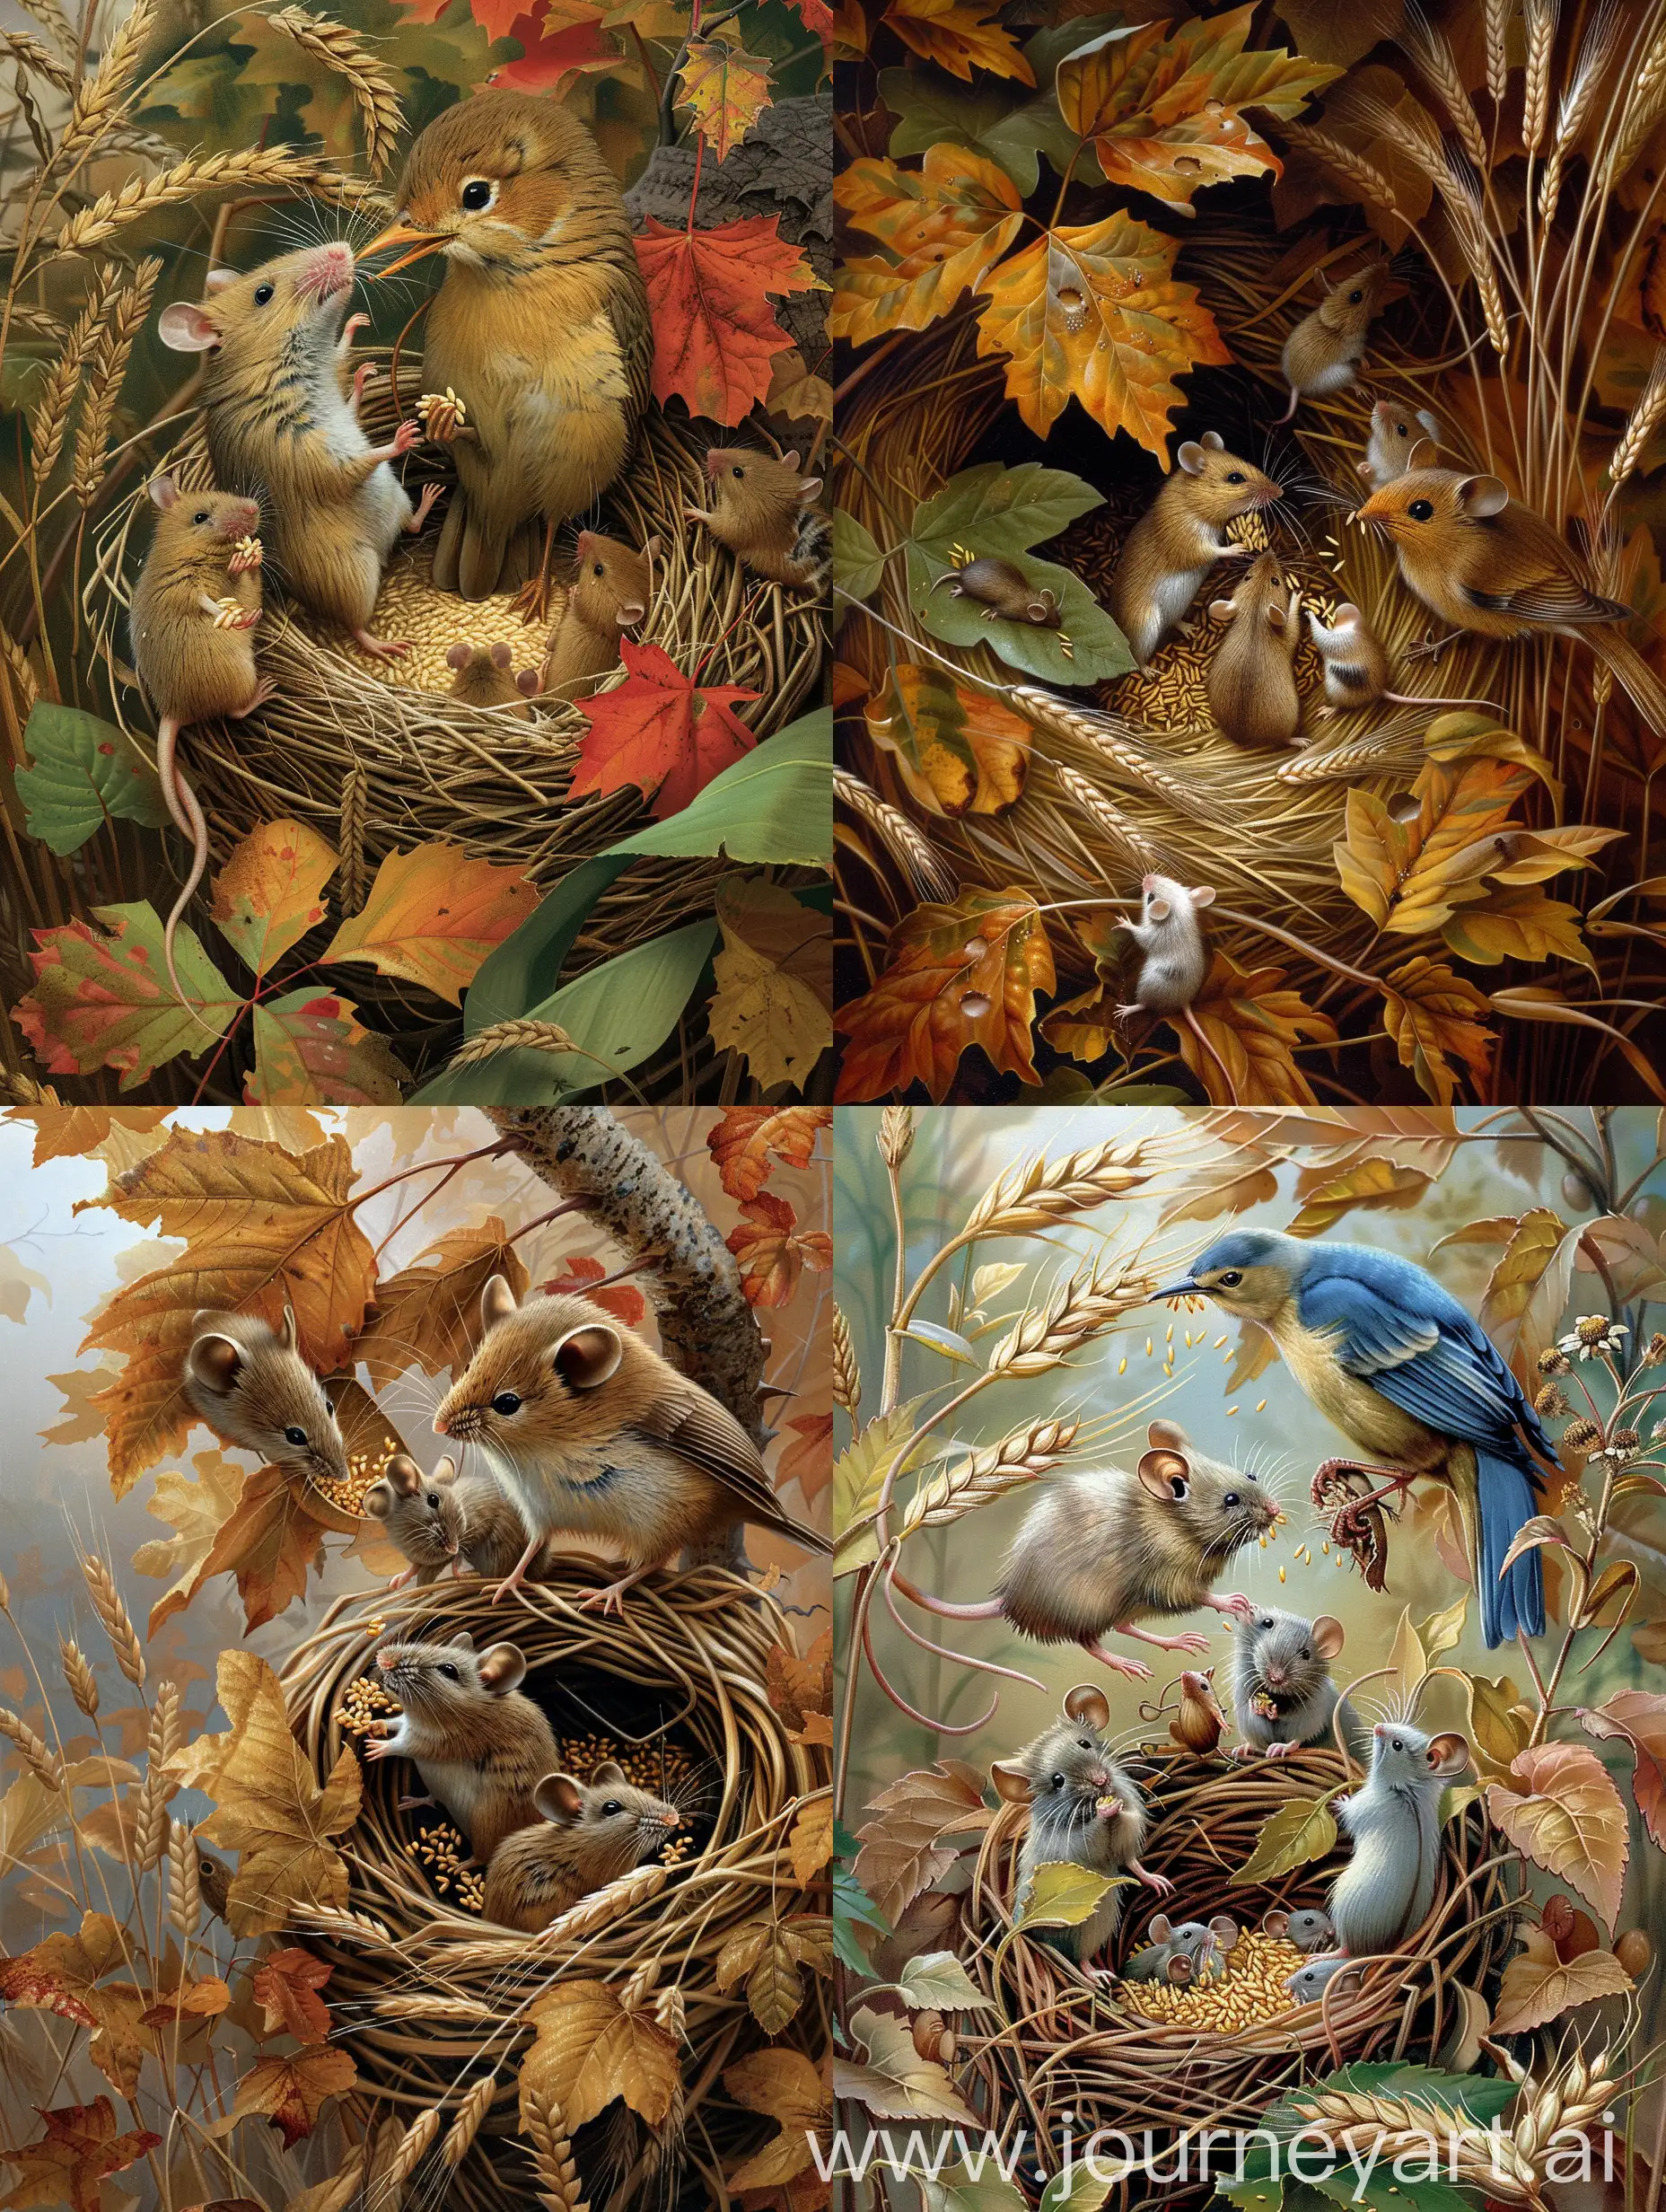 Surrealistic art depicting mice, small rodents, birds, wheat, leaves, wildflowers, mice eat grains of wheat, the bird feeds the chicks in the nest, all these images merge together in a surrealistic way